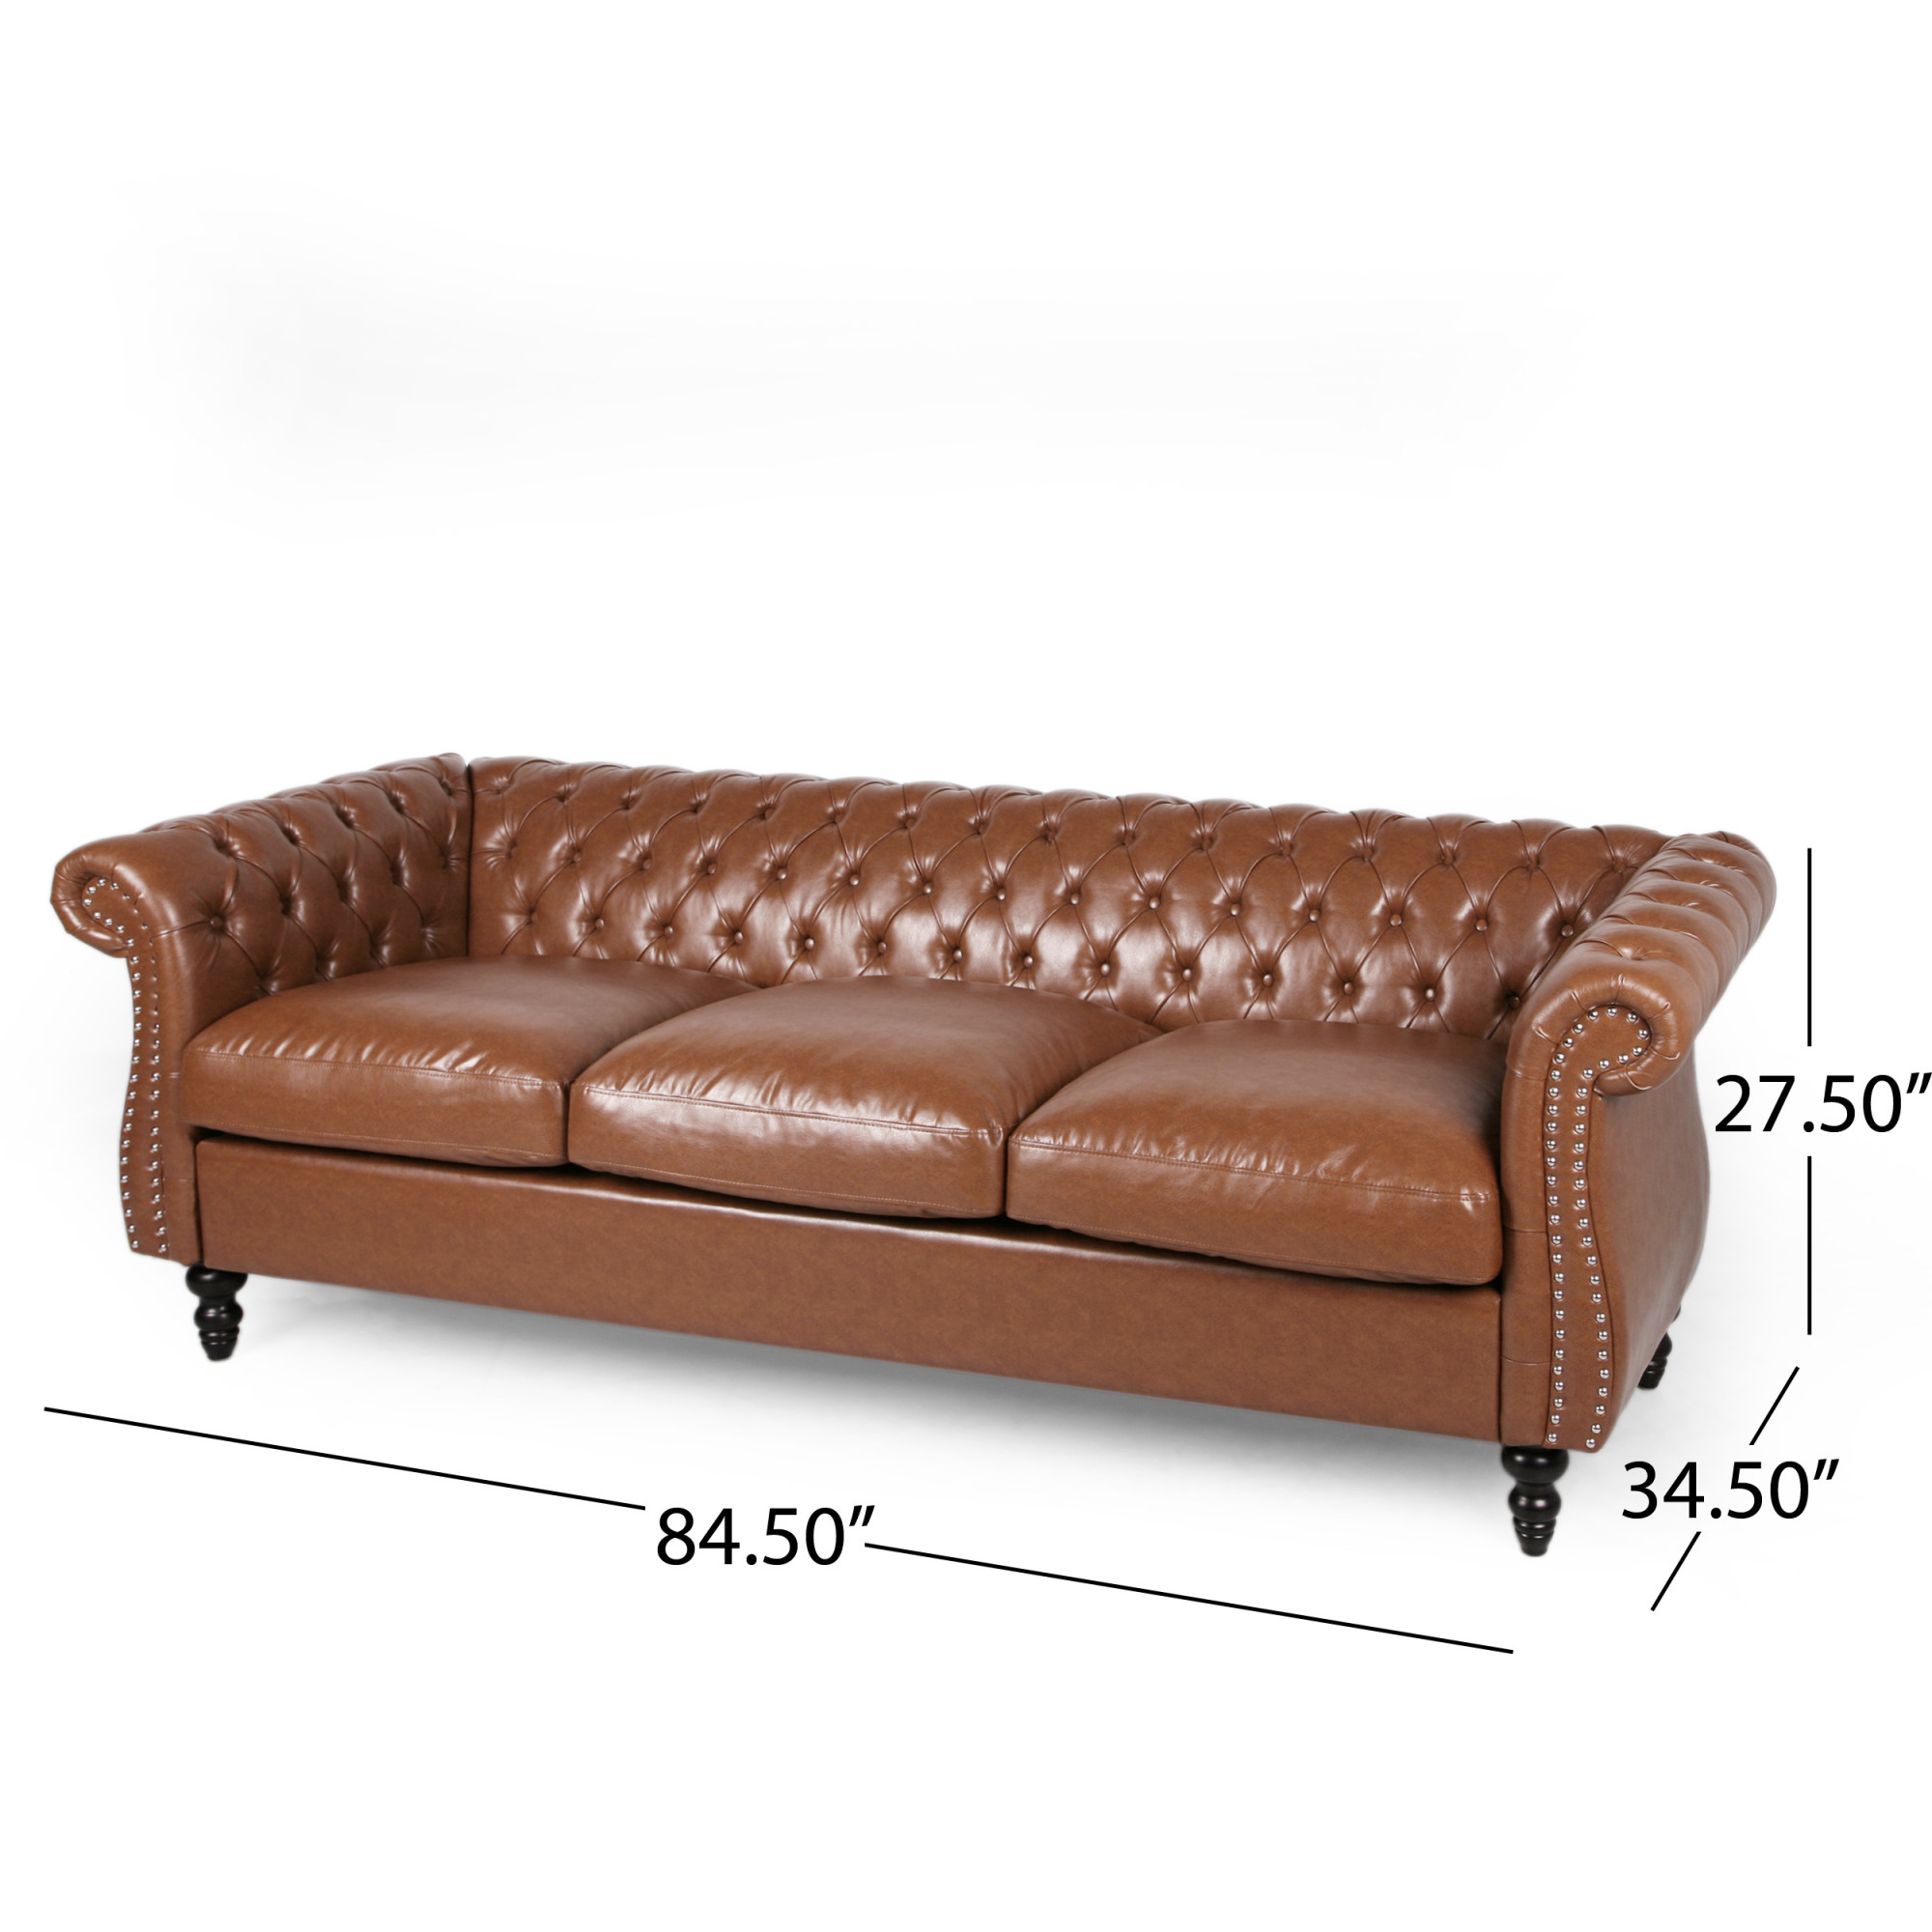 Somerville Chesterfield Tufted Sofa with Scroll Arms, Cognac Brown and ...